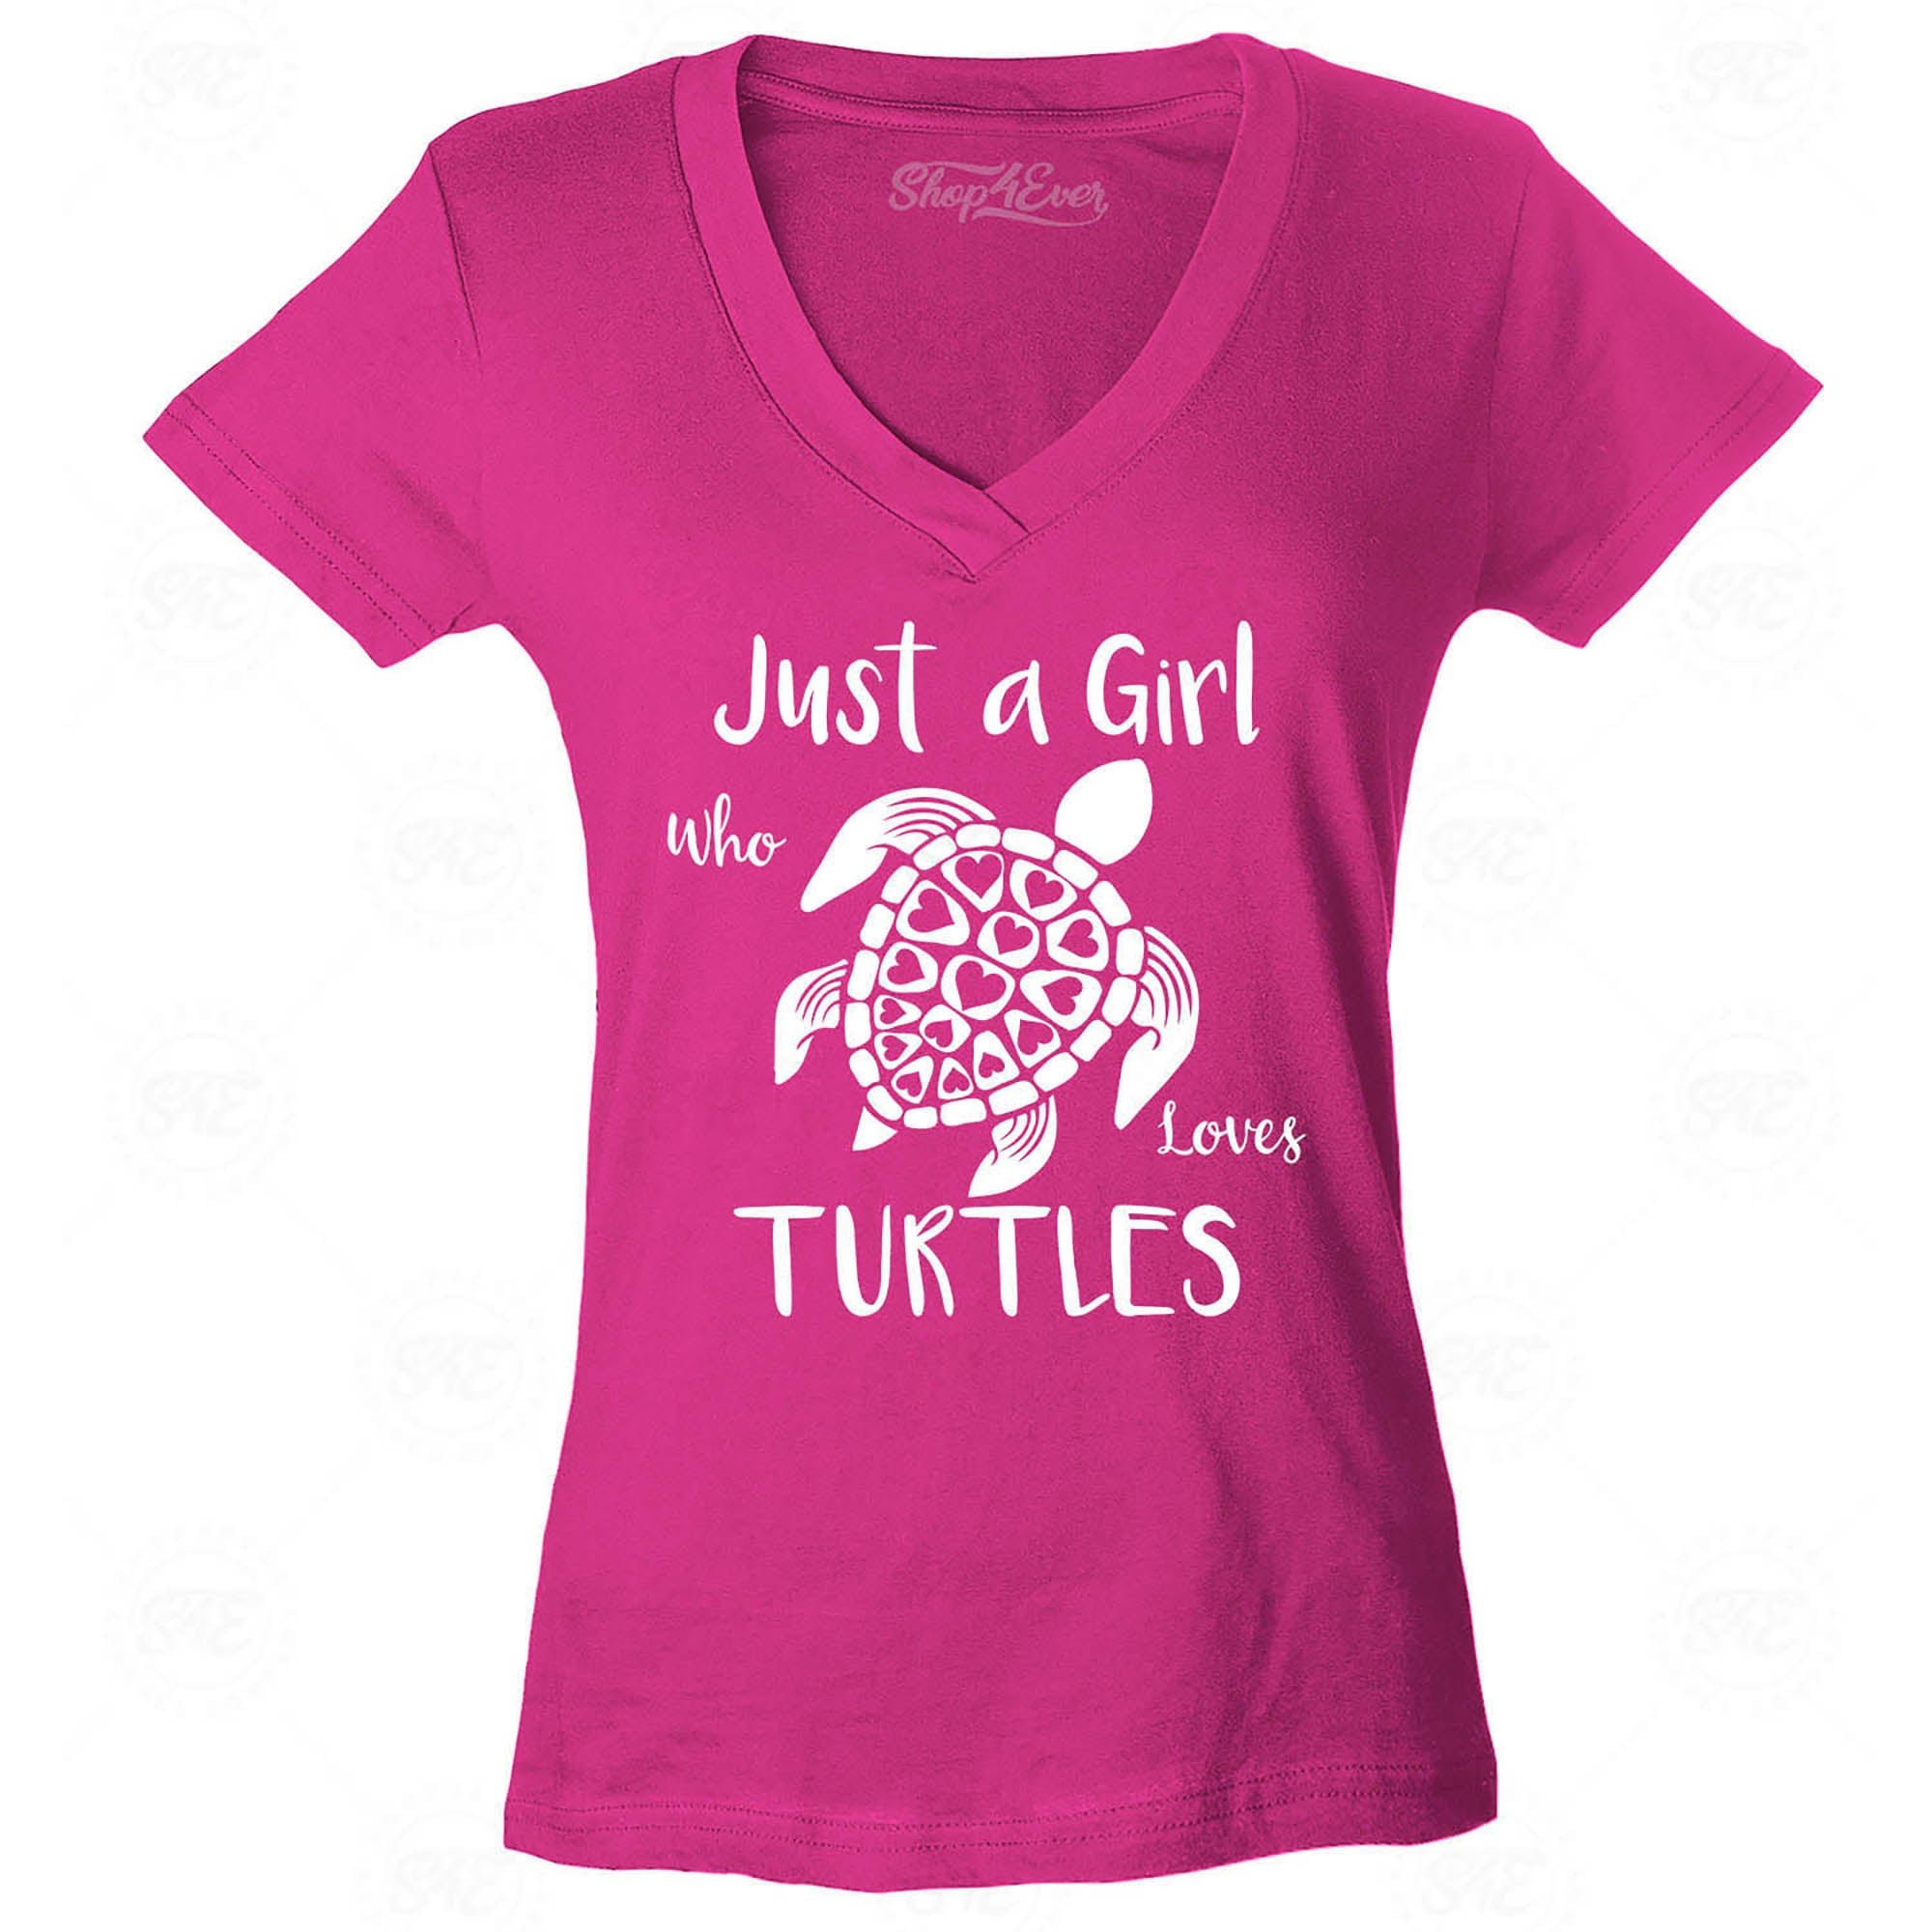 Just A Girl Who Loves Turtles Women's V-Neck T-Shirt Slim Fit